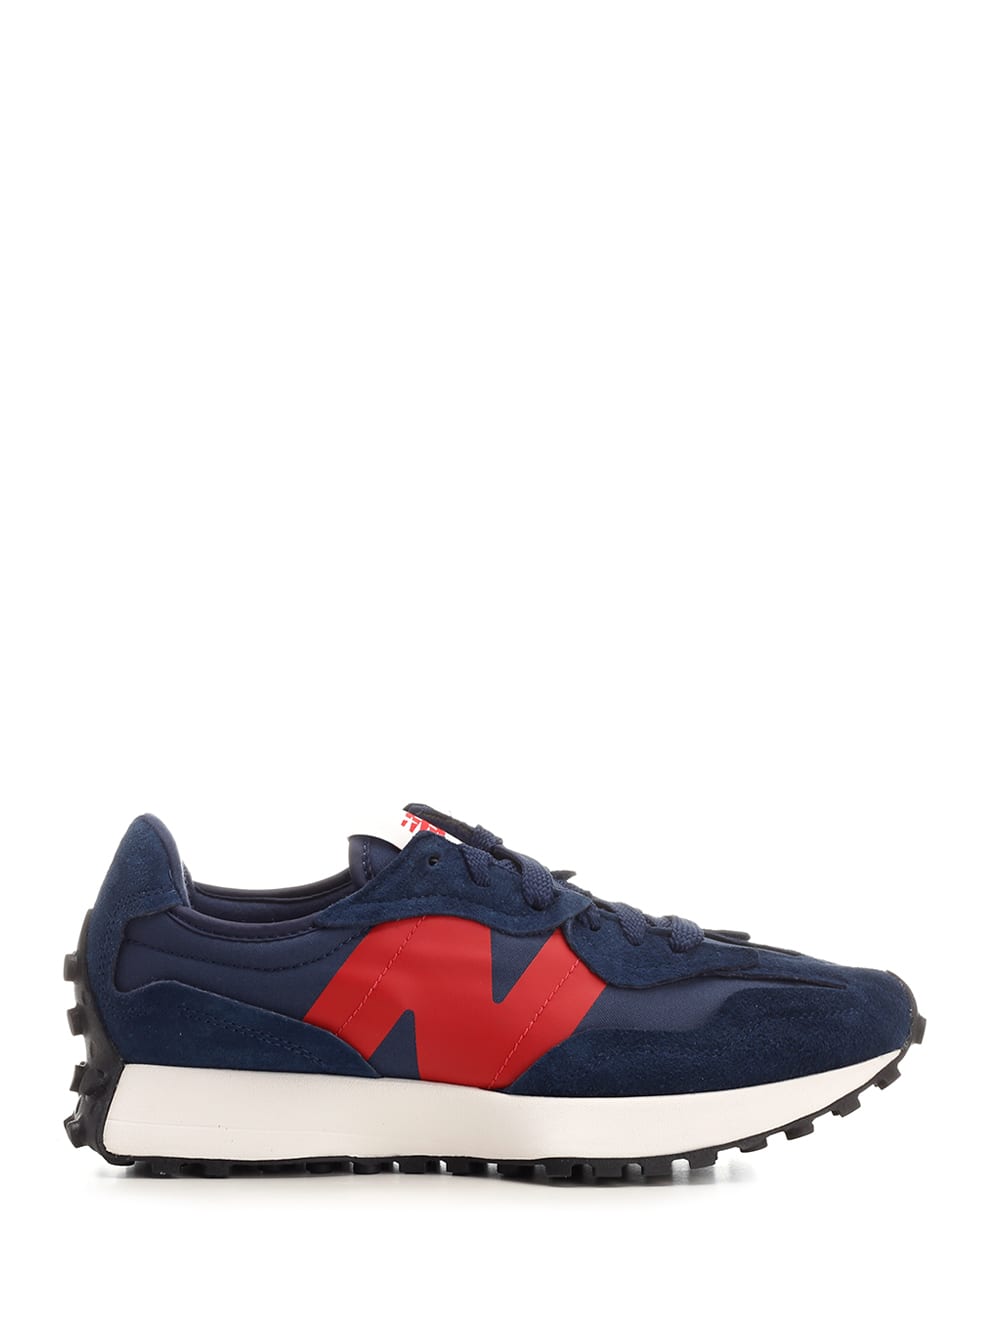 NEW BALANCE BLUE/RED 327 SNEAKERS